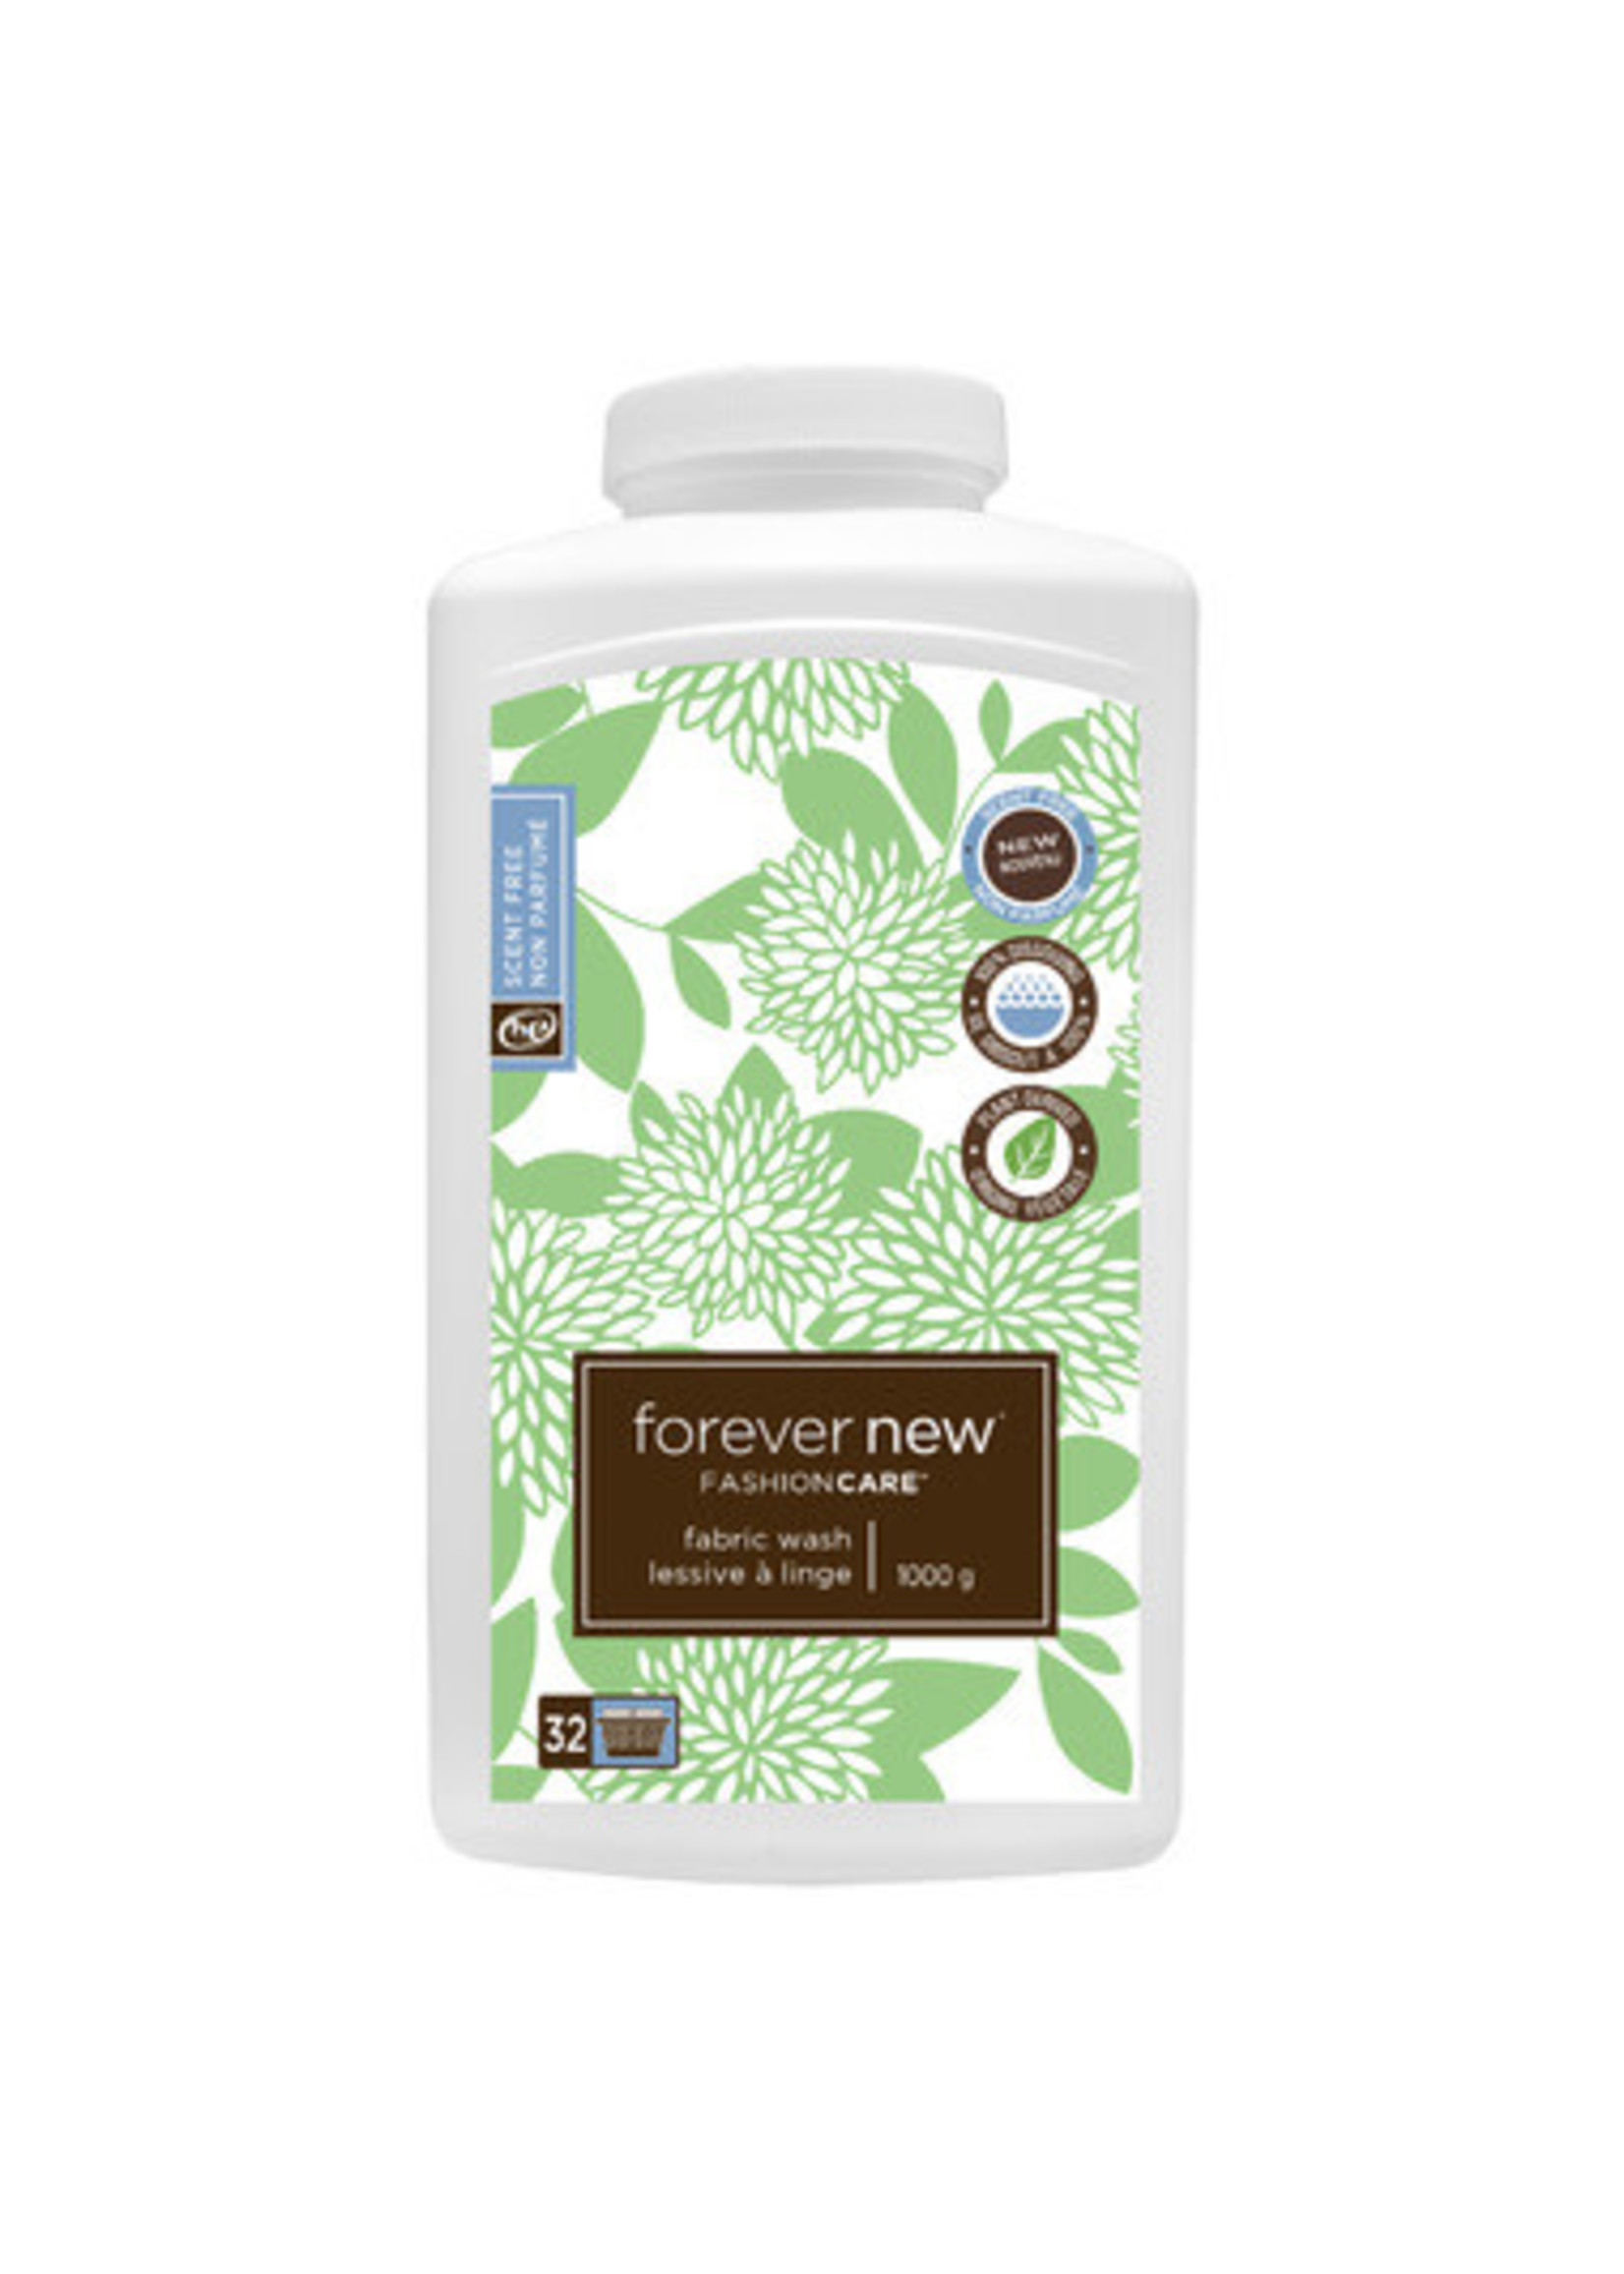 Forever New 1KG Laundry Detergent Powder Delicate Natural Eco Friendly